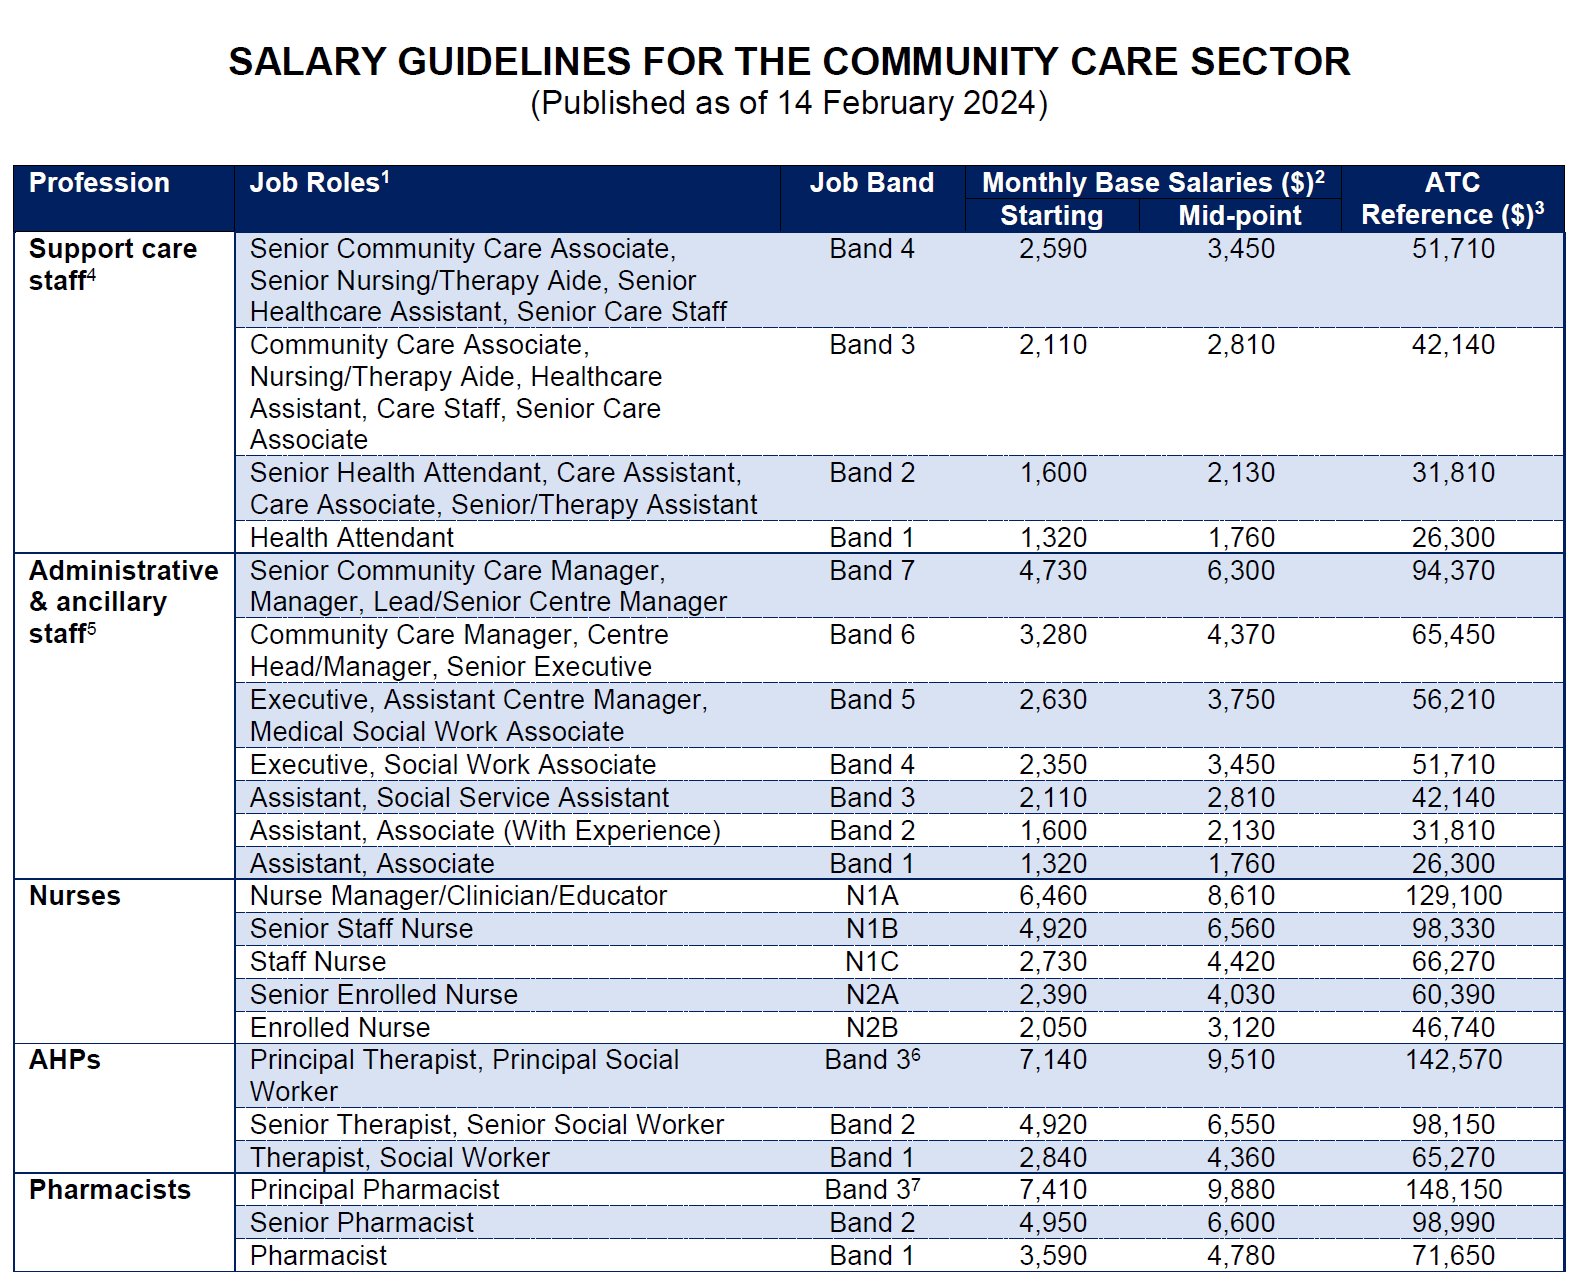 MOH releases salary guidelines for community care sector